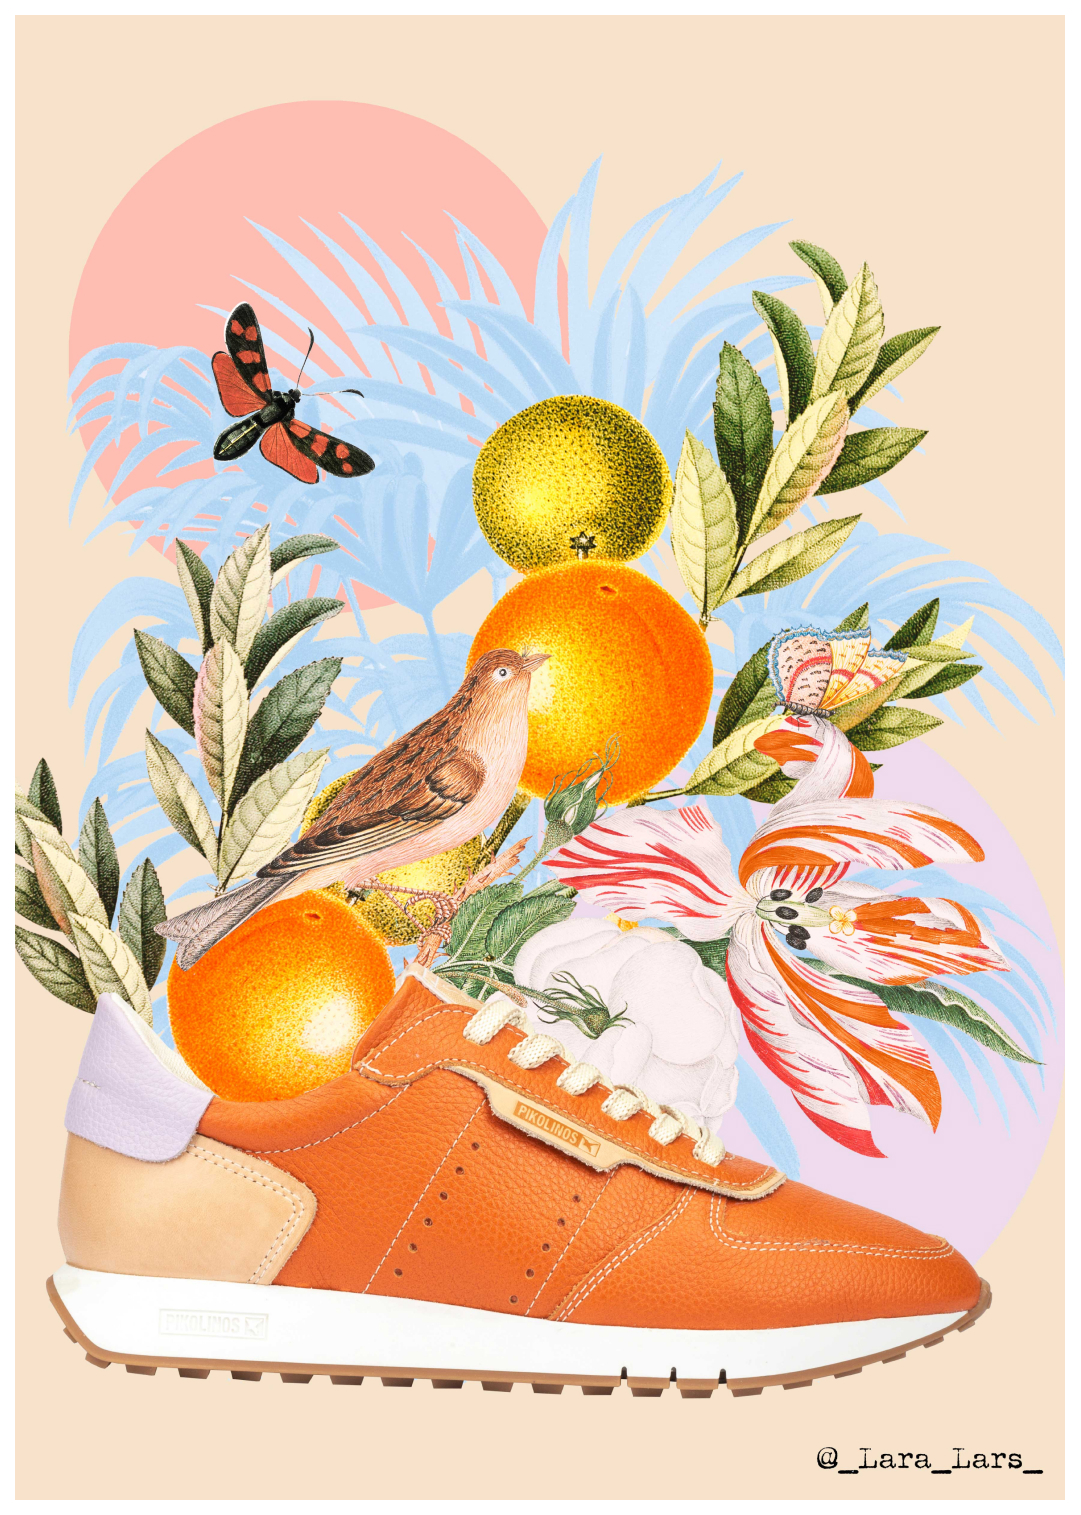 Women's orange sneakers on a drawing created by Lara Lars with leaves, flowers, birds and oranges